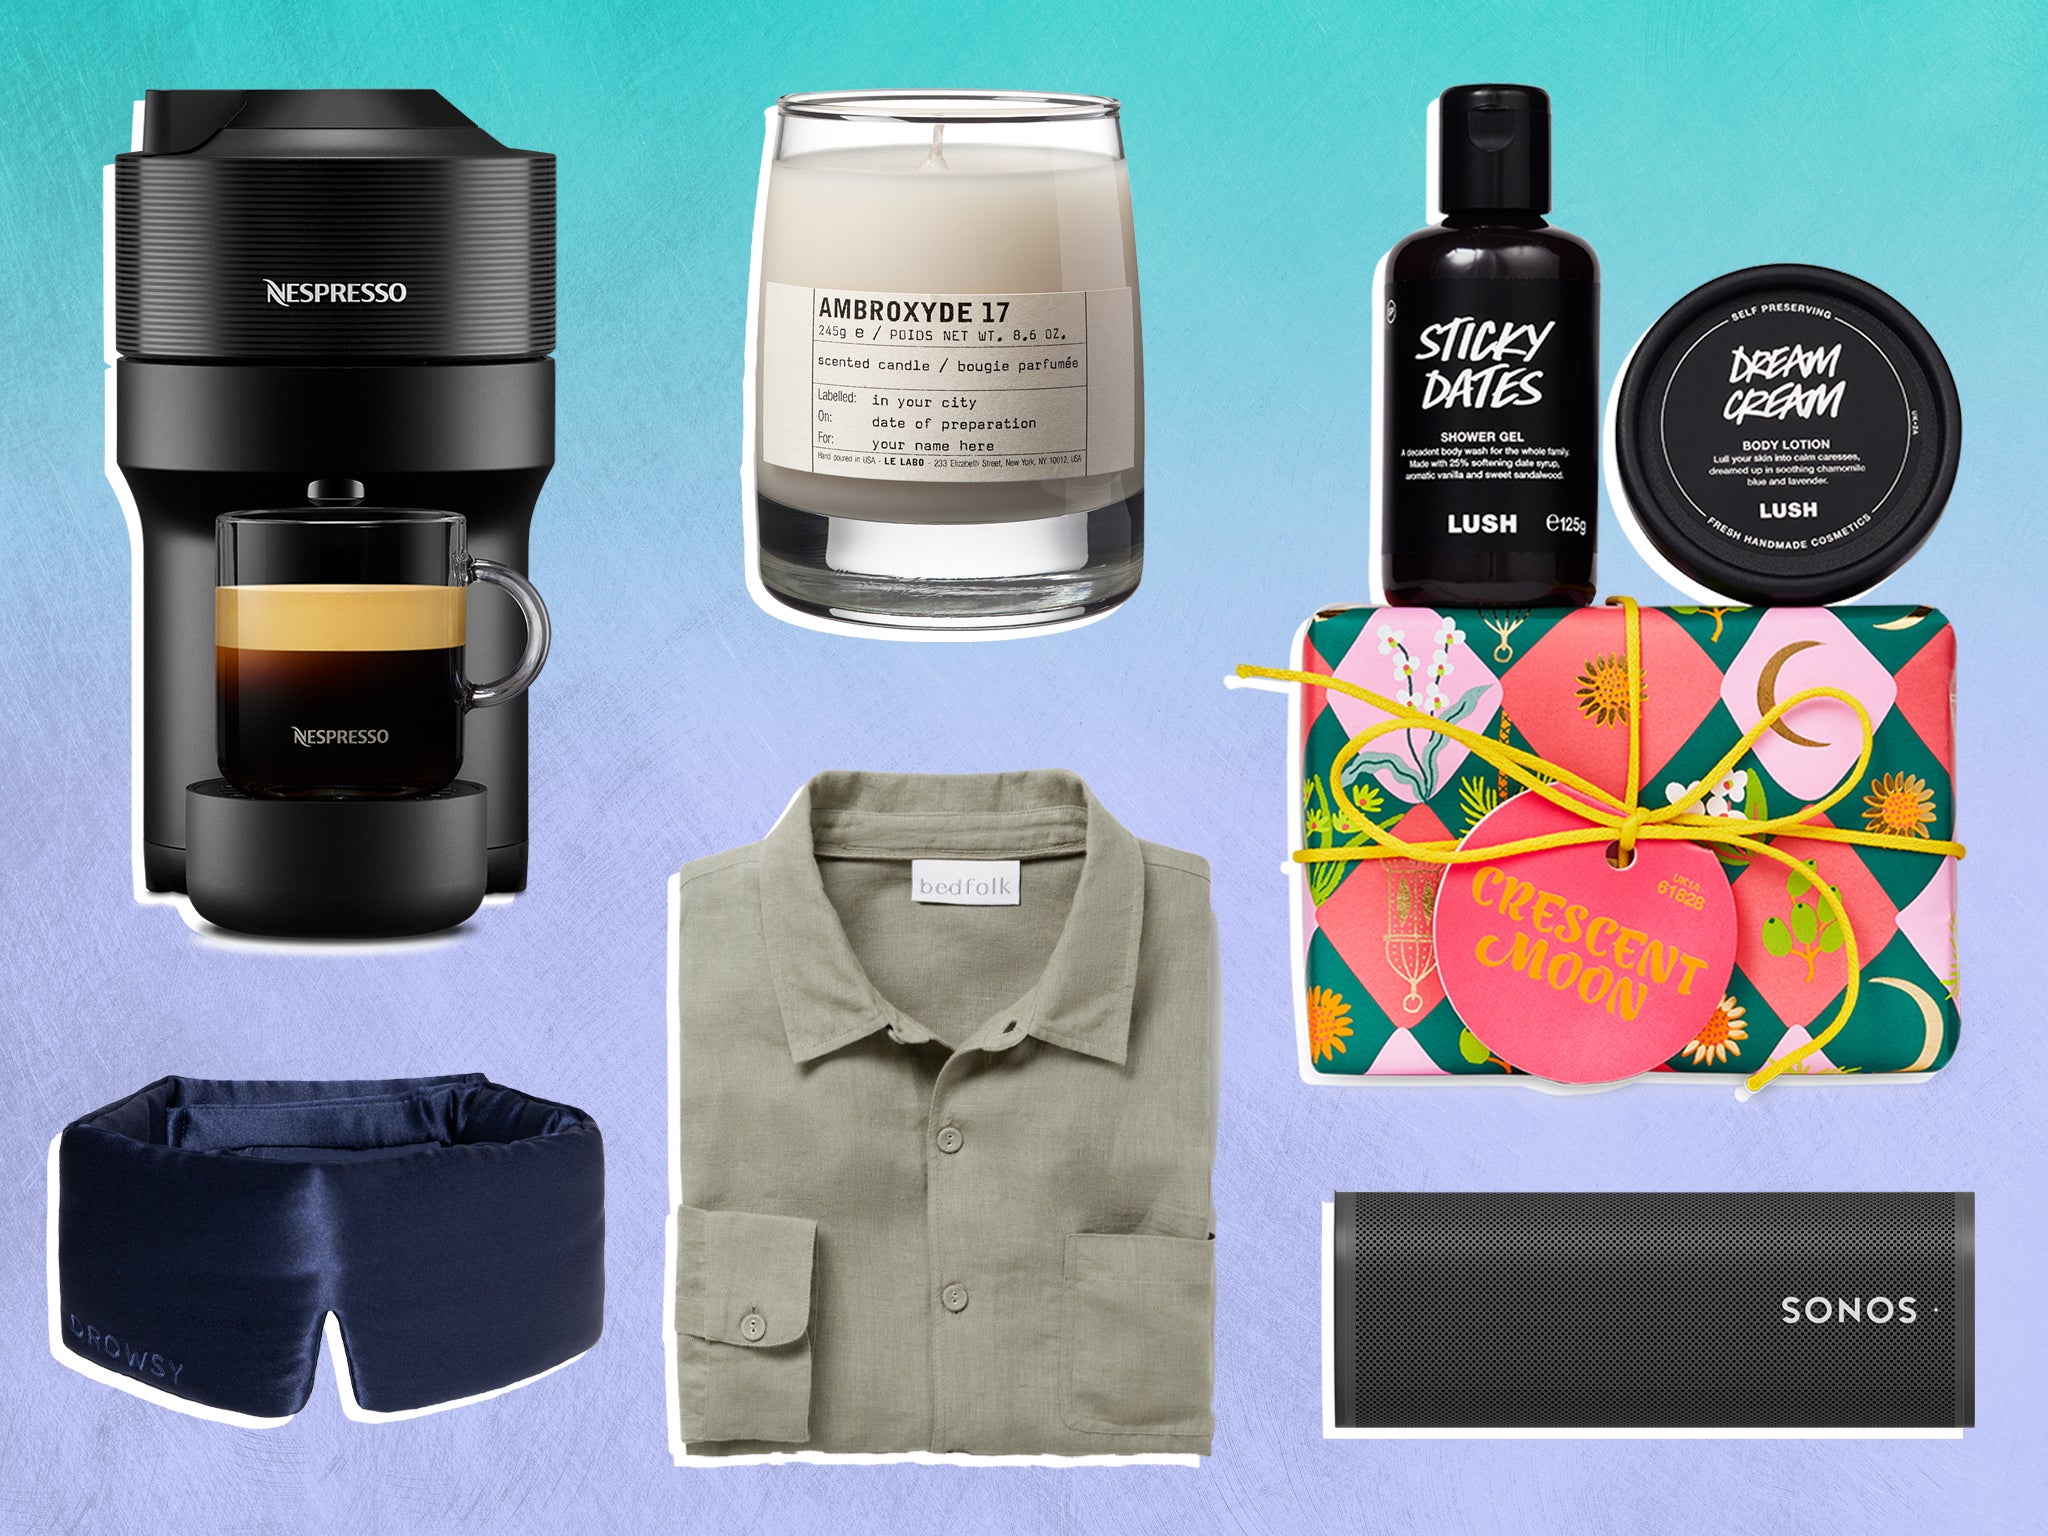 We tried tech, beauty buys, fragrances and bespoke presents dedicated to the festival